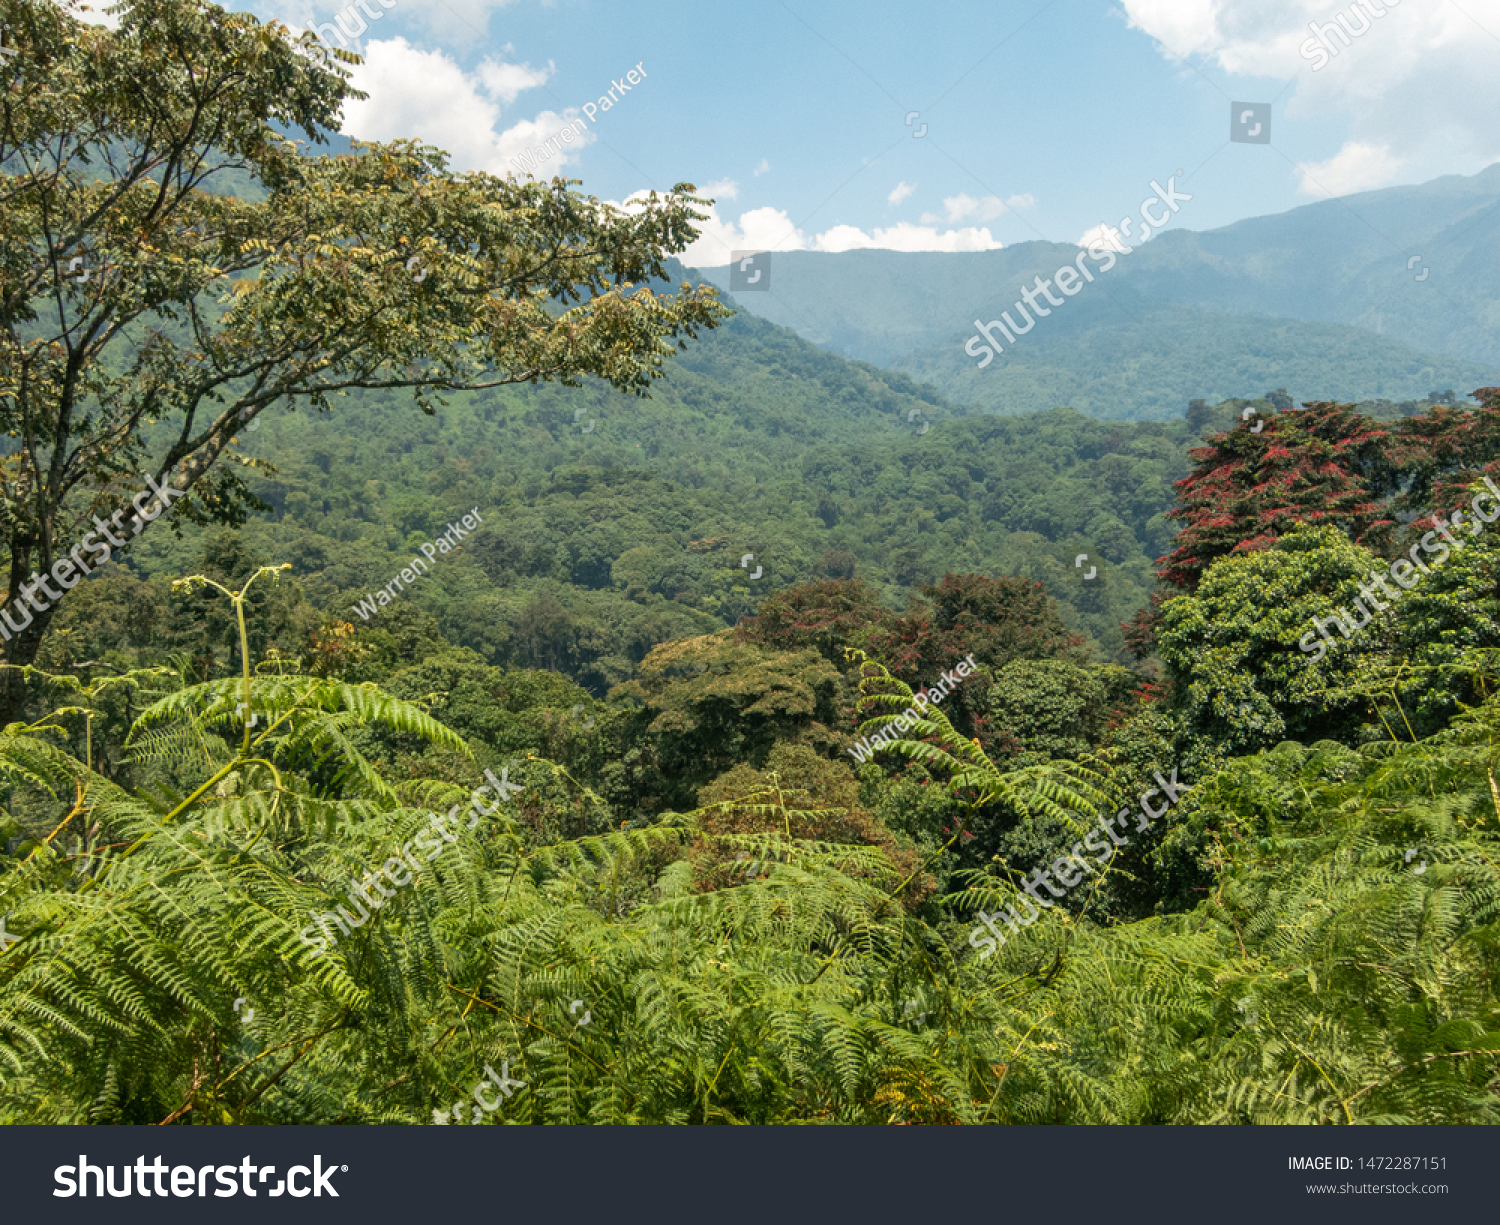 Rwenzori Mountain National Park forest and mountain views #1472287151